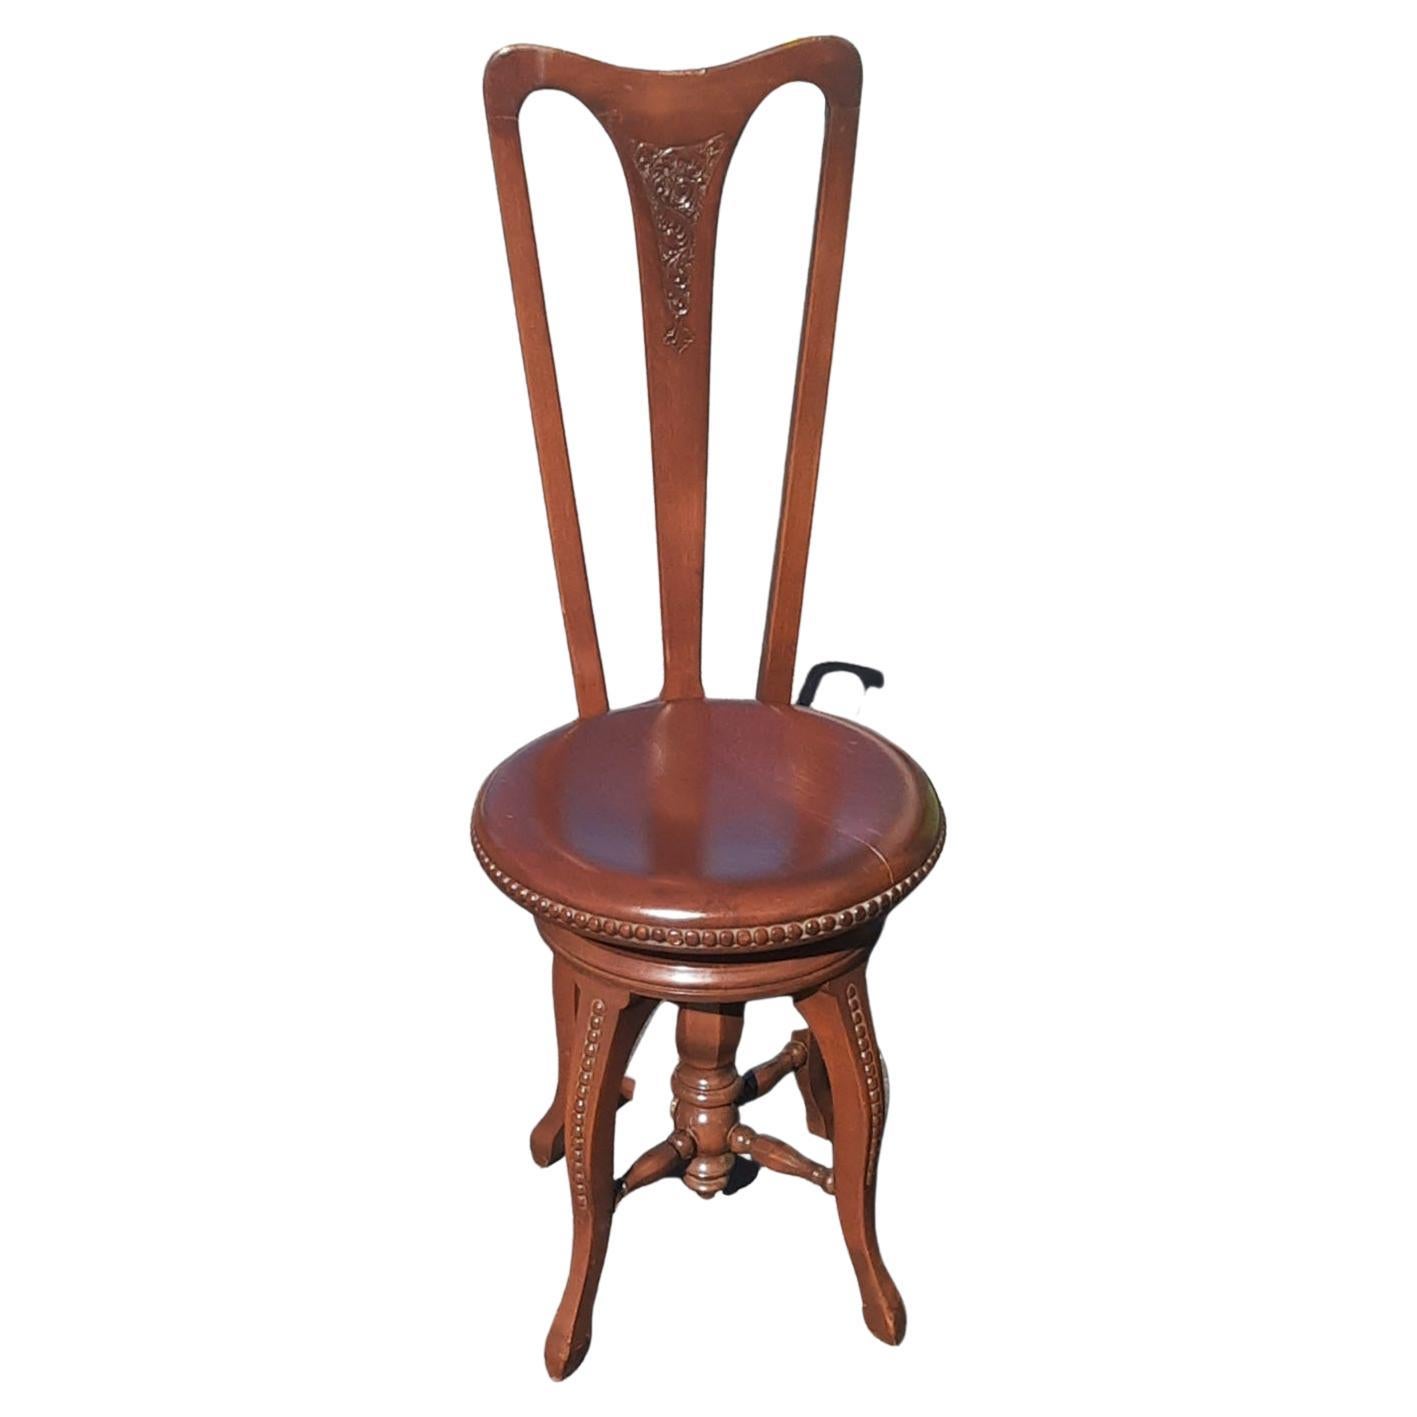 An American music room chair with shaped crested rail, incised with scrolls. Ring turned supports, circular height adjustable seat, turned legs, x-stretcher centered by a turned pillar. Swiveling seat.
Clean and steady antique